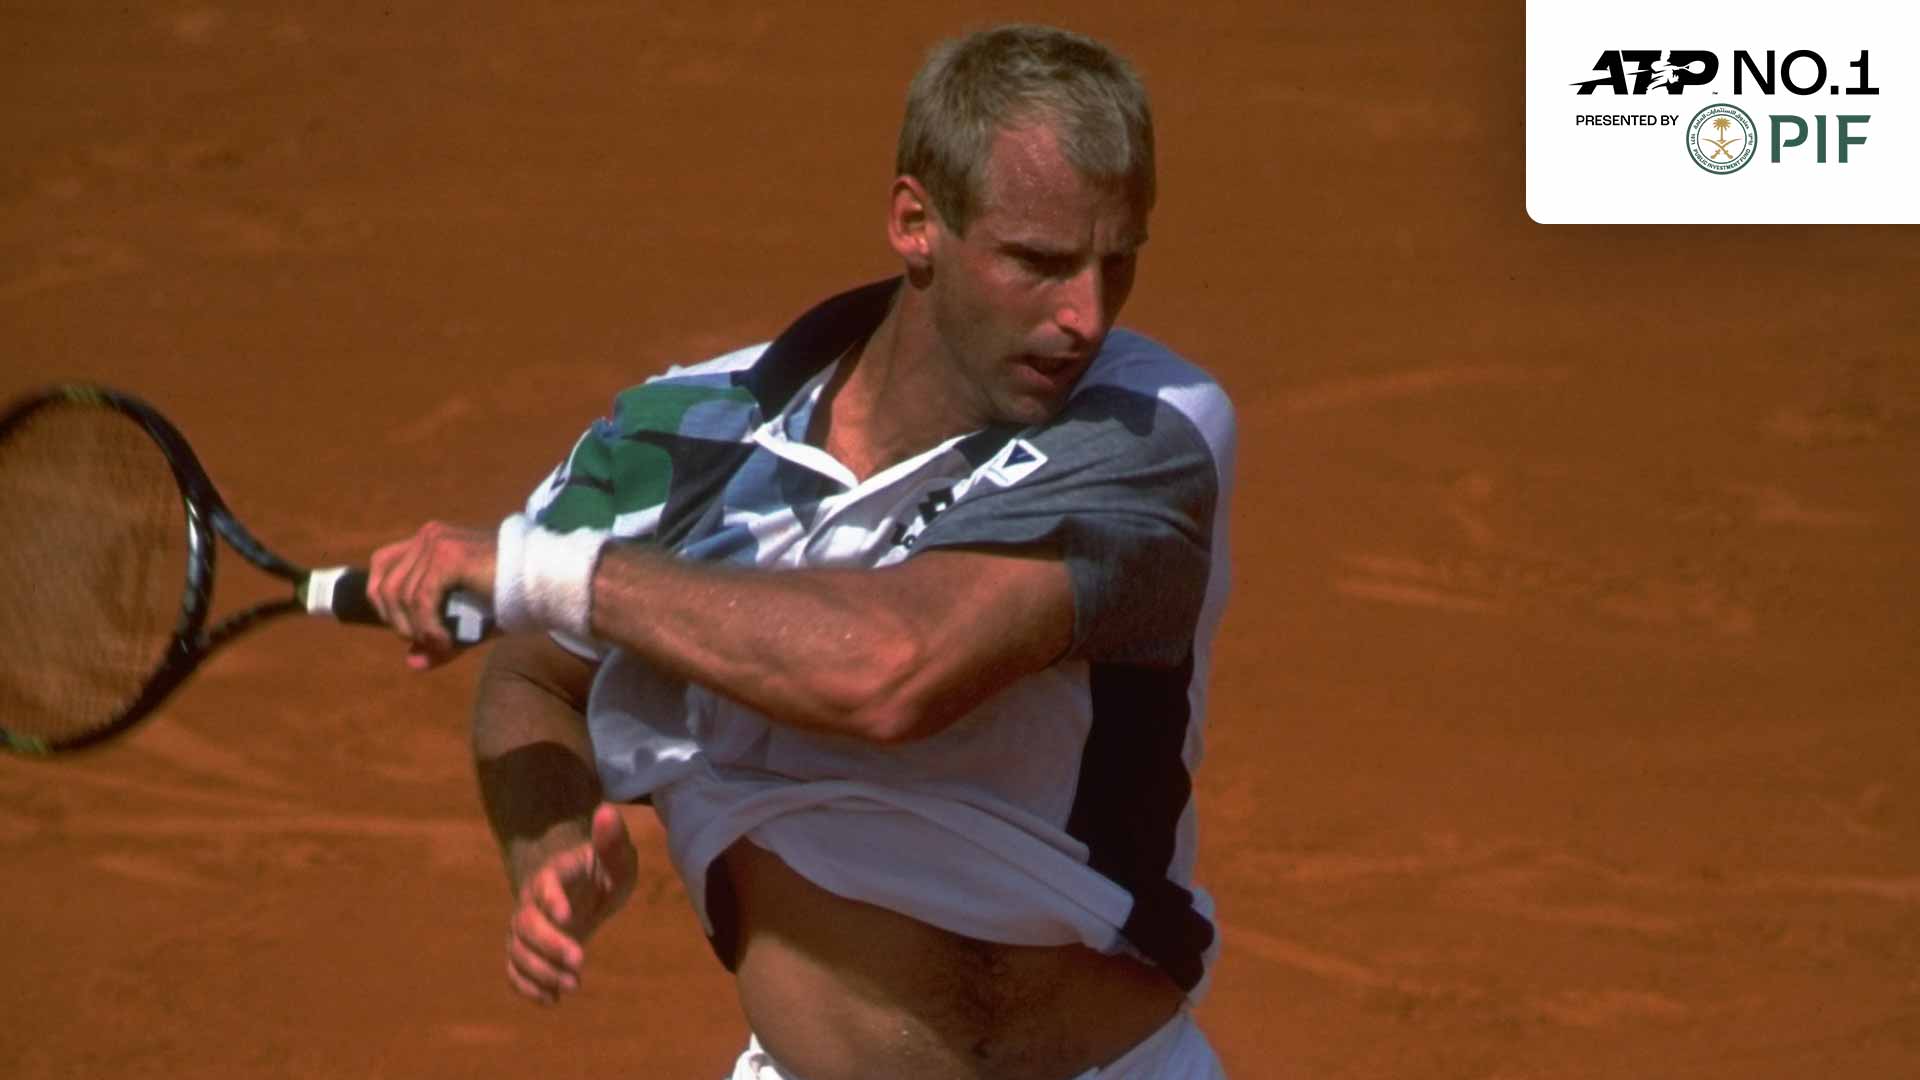 Thomas Muster first rose to No. 1 in the PIF ATP Rankings in 1996.